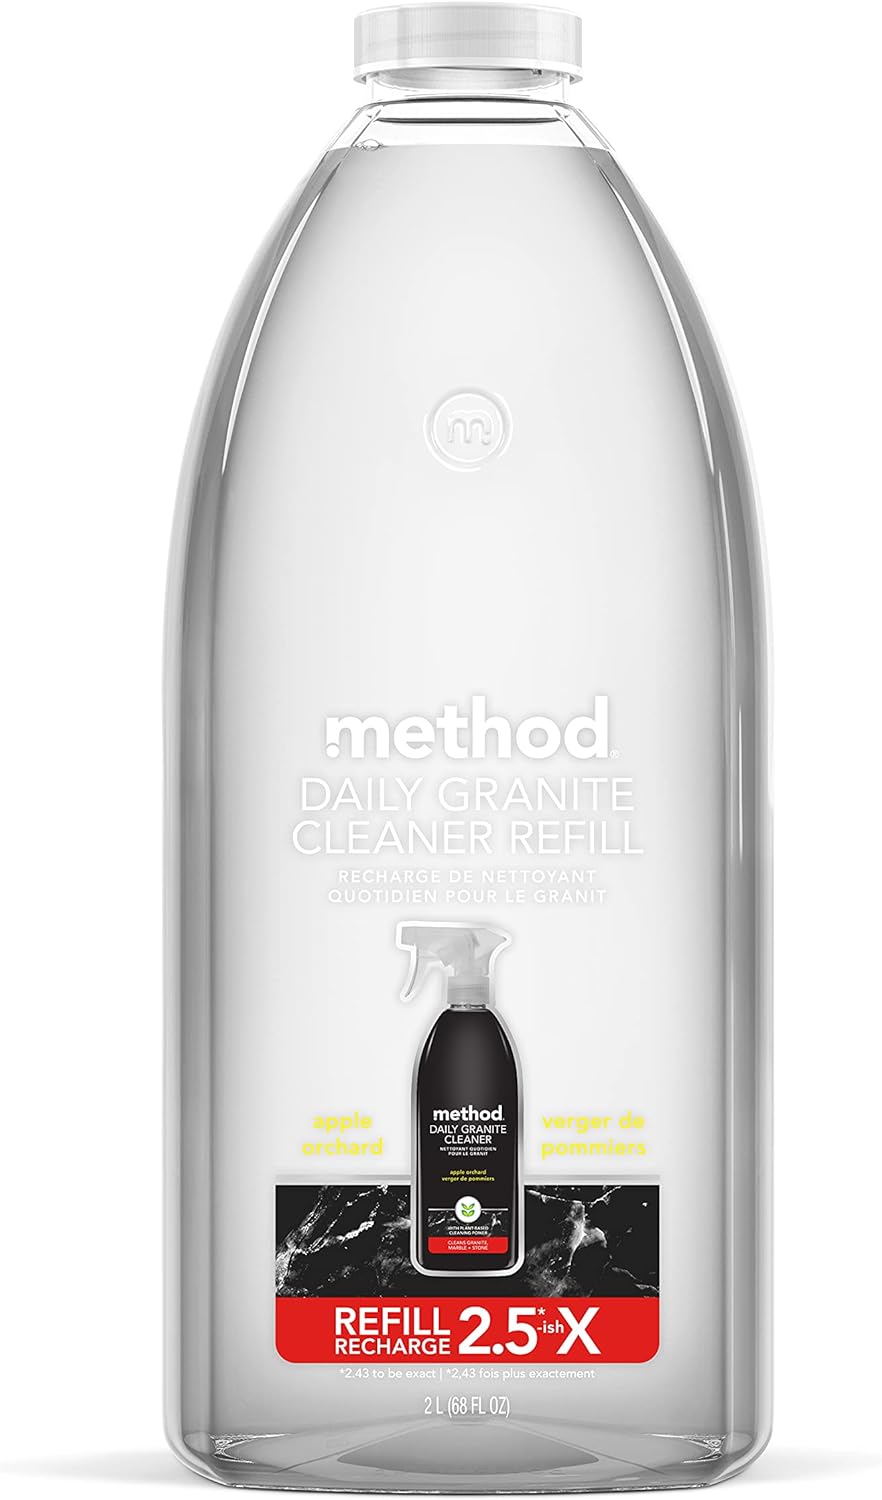 Method Daily Granite Cleaner Refill, Apple Orchard, Plant-Based Cleaning Agent for Granite, Marble, and Other Sealed Stone, 68 fl oz, (Pack of 1)